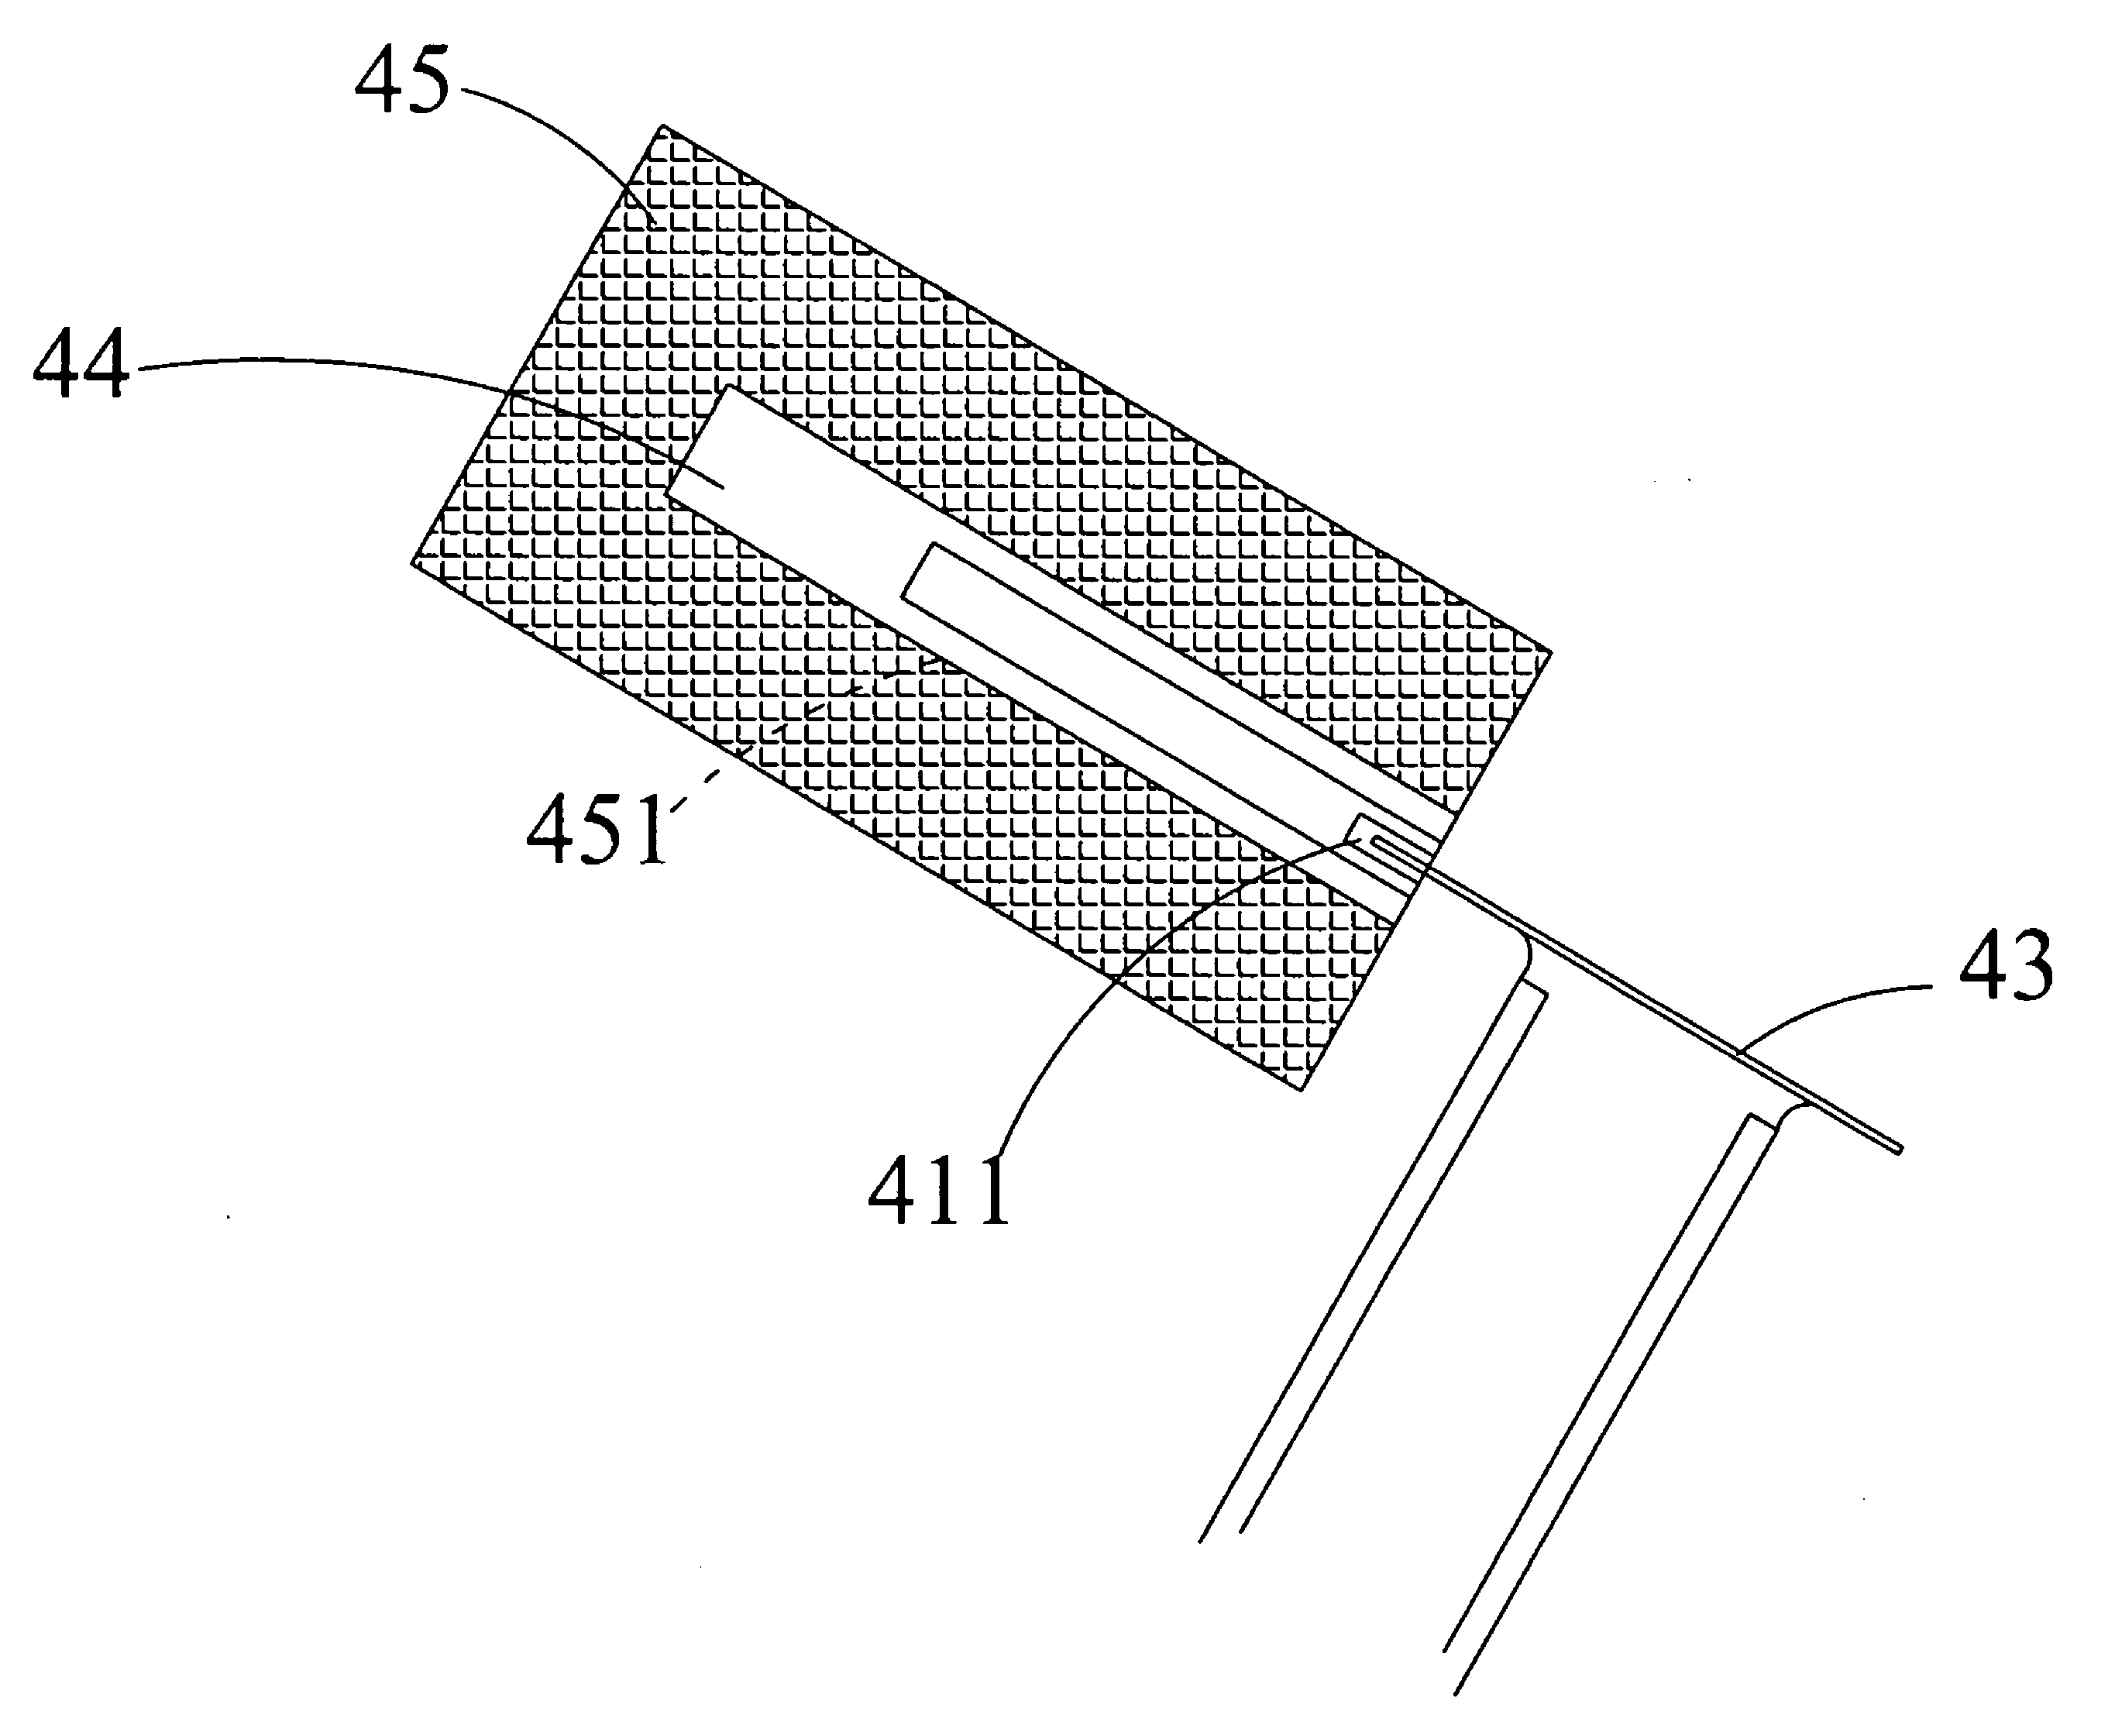 Nebulization apparatus with a packaging and fixing structure